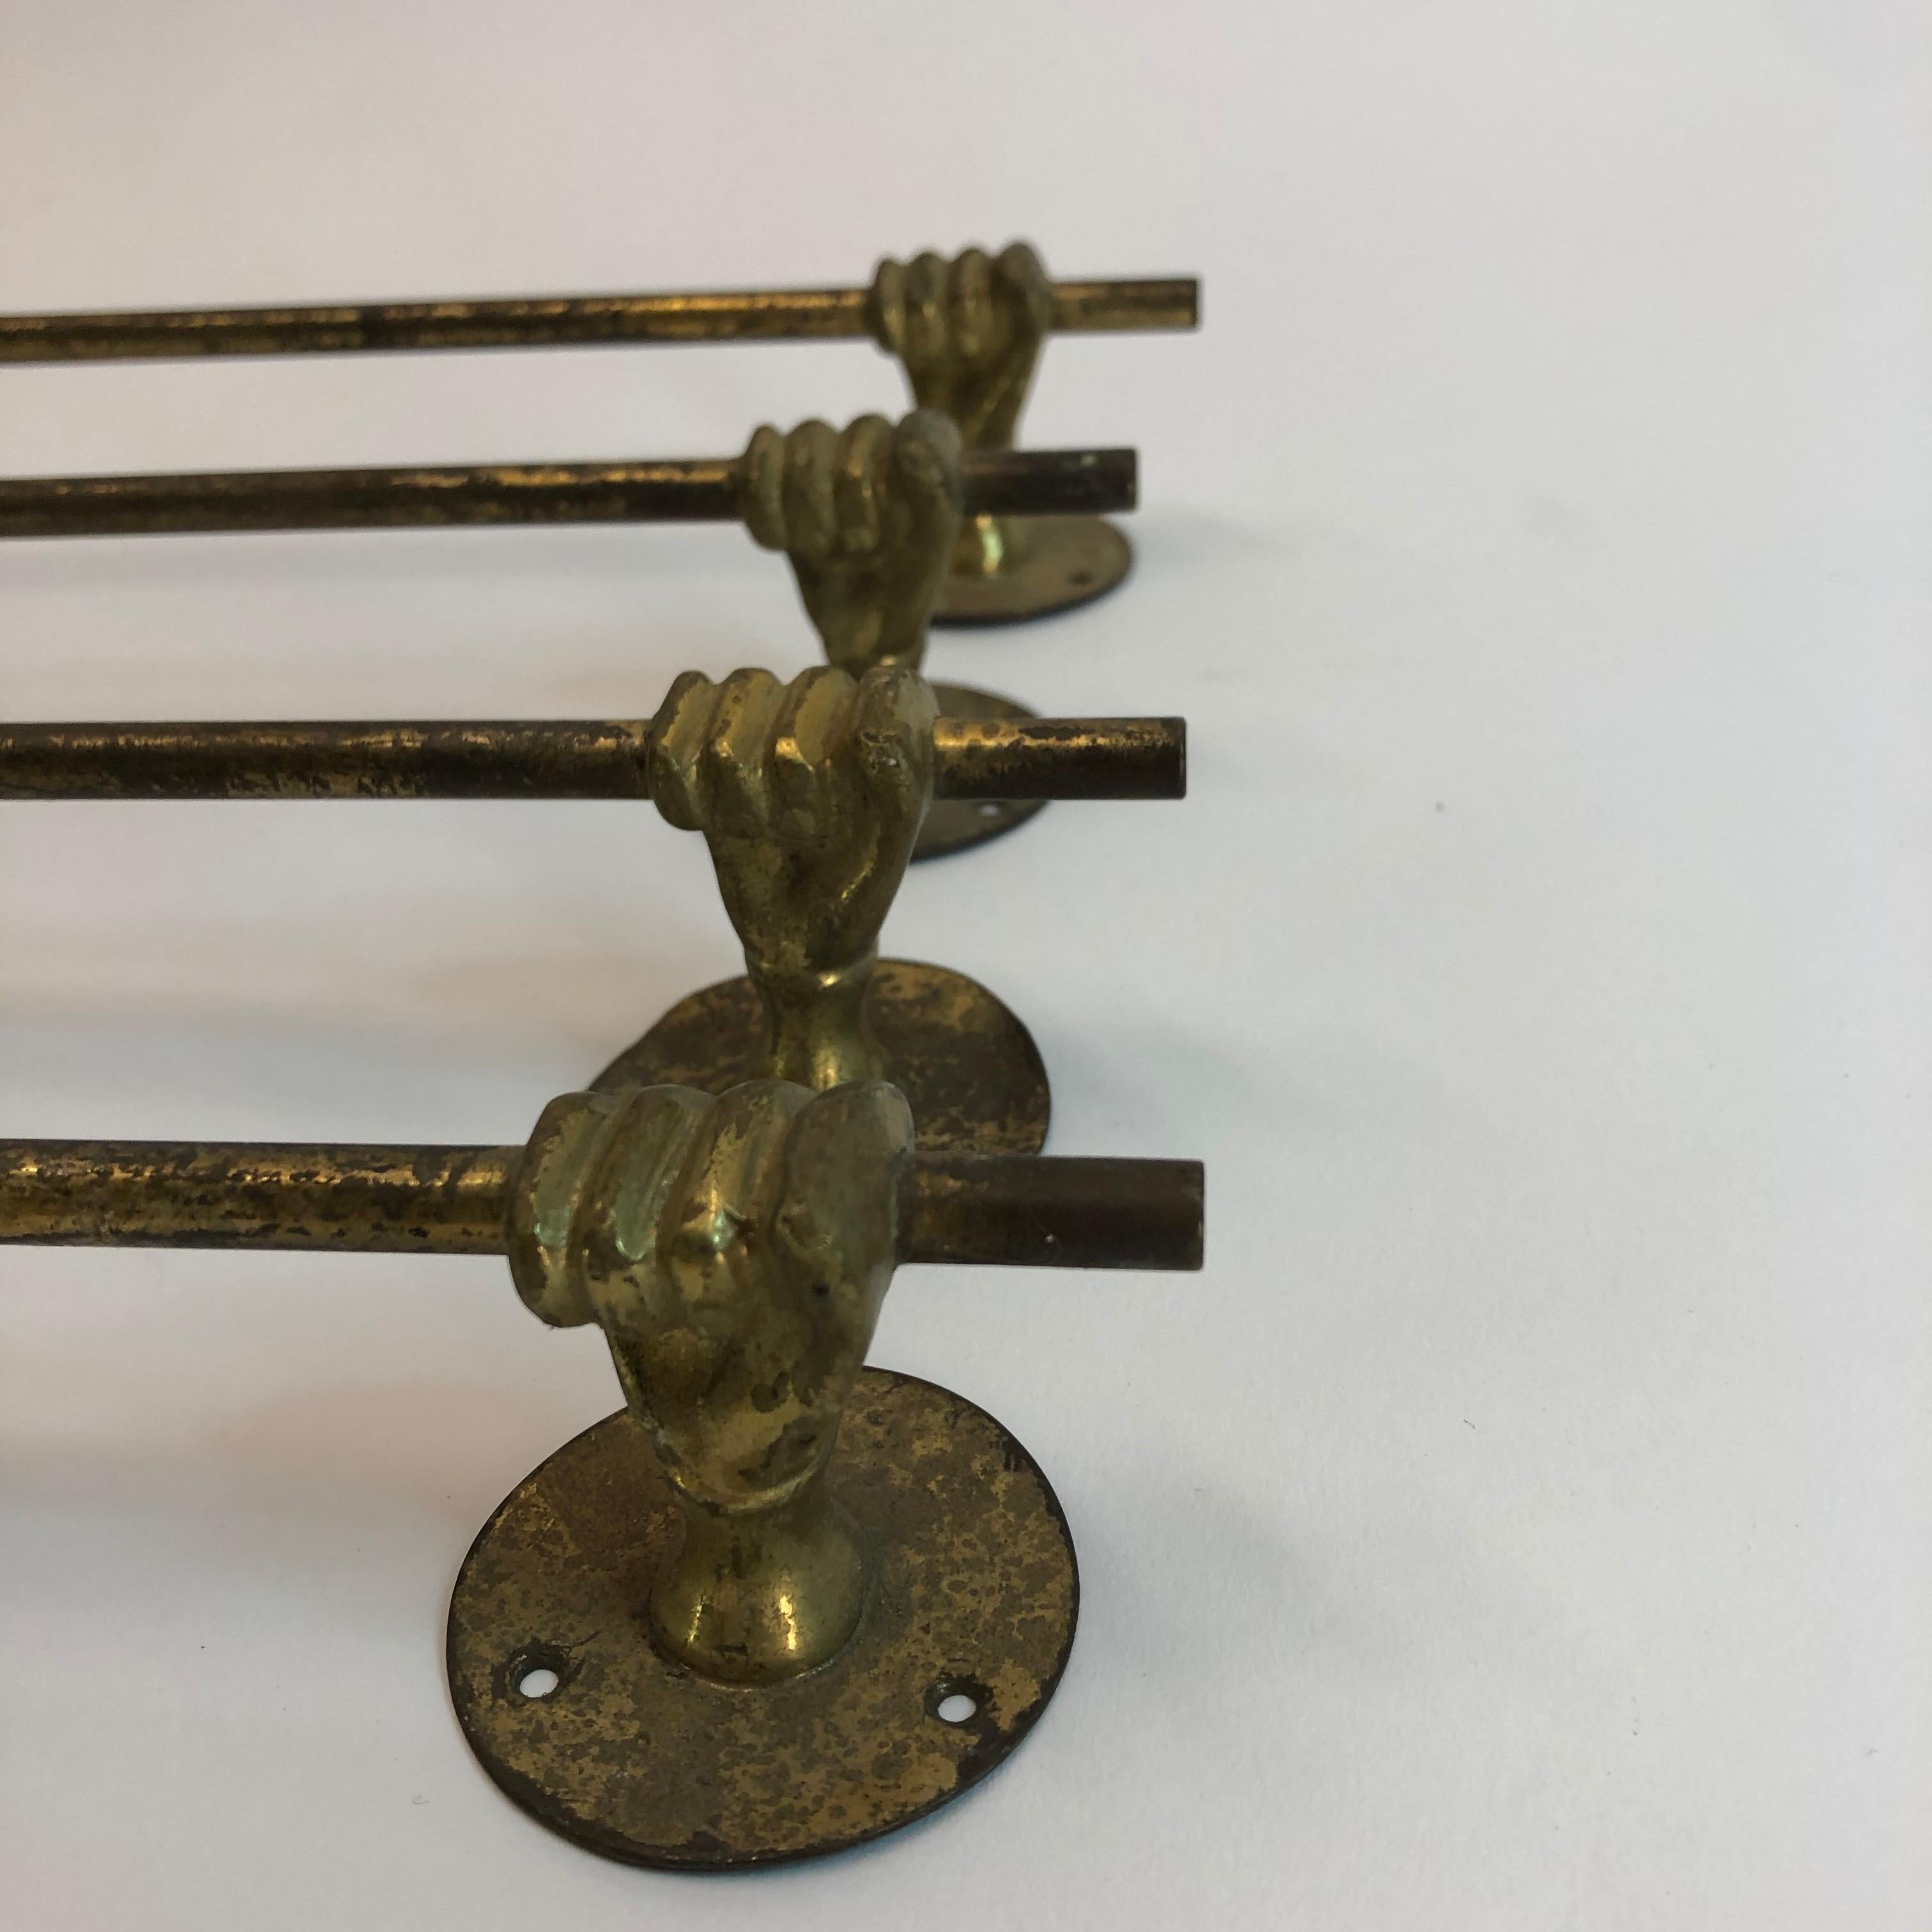 Vintage metal/brass hands/fists holding a towel rail, set of 4.
The rails are in used vintage condition. They came out of from a beautiful French chateau's kitchen.
Measurements:
Length total 37 cm (between hands 28 cm)
Depth total 4 cm (rail to